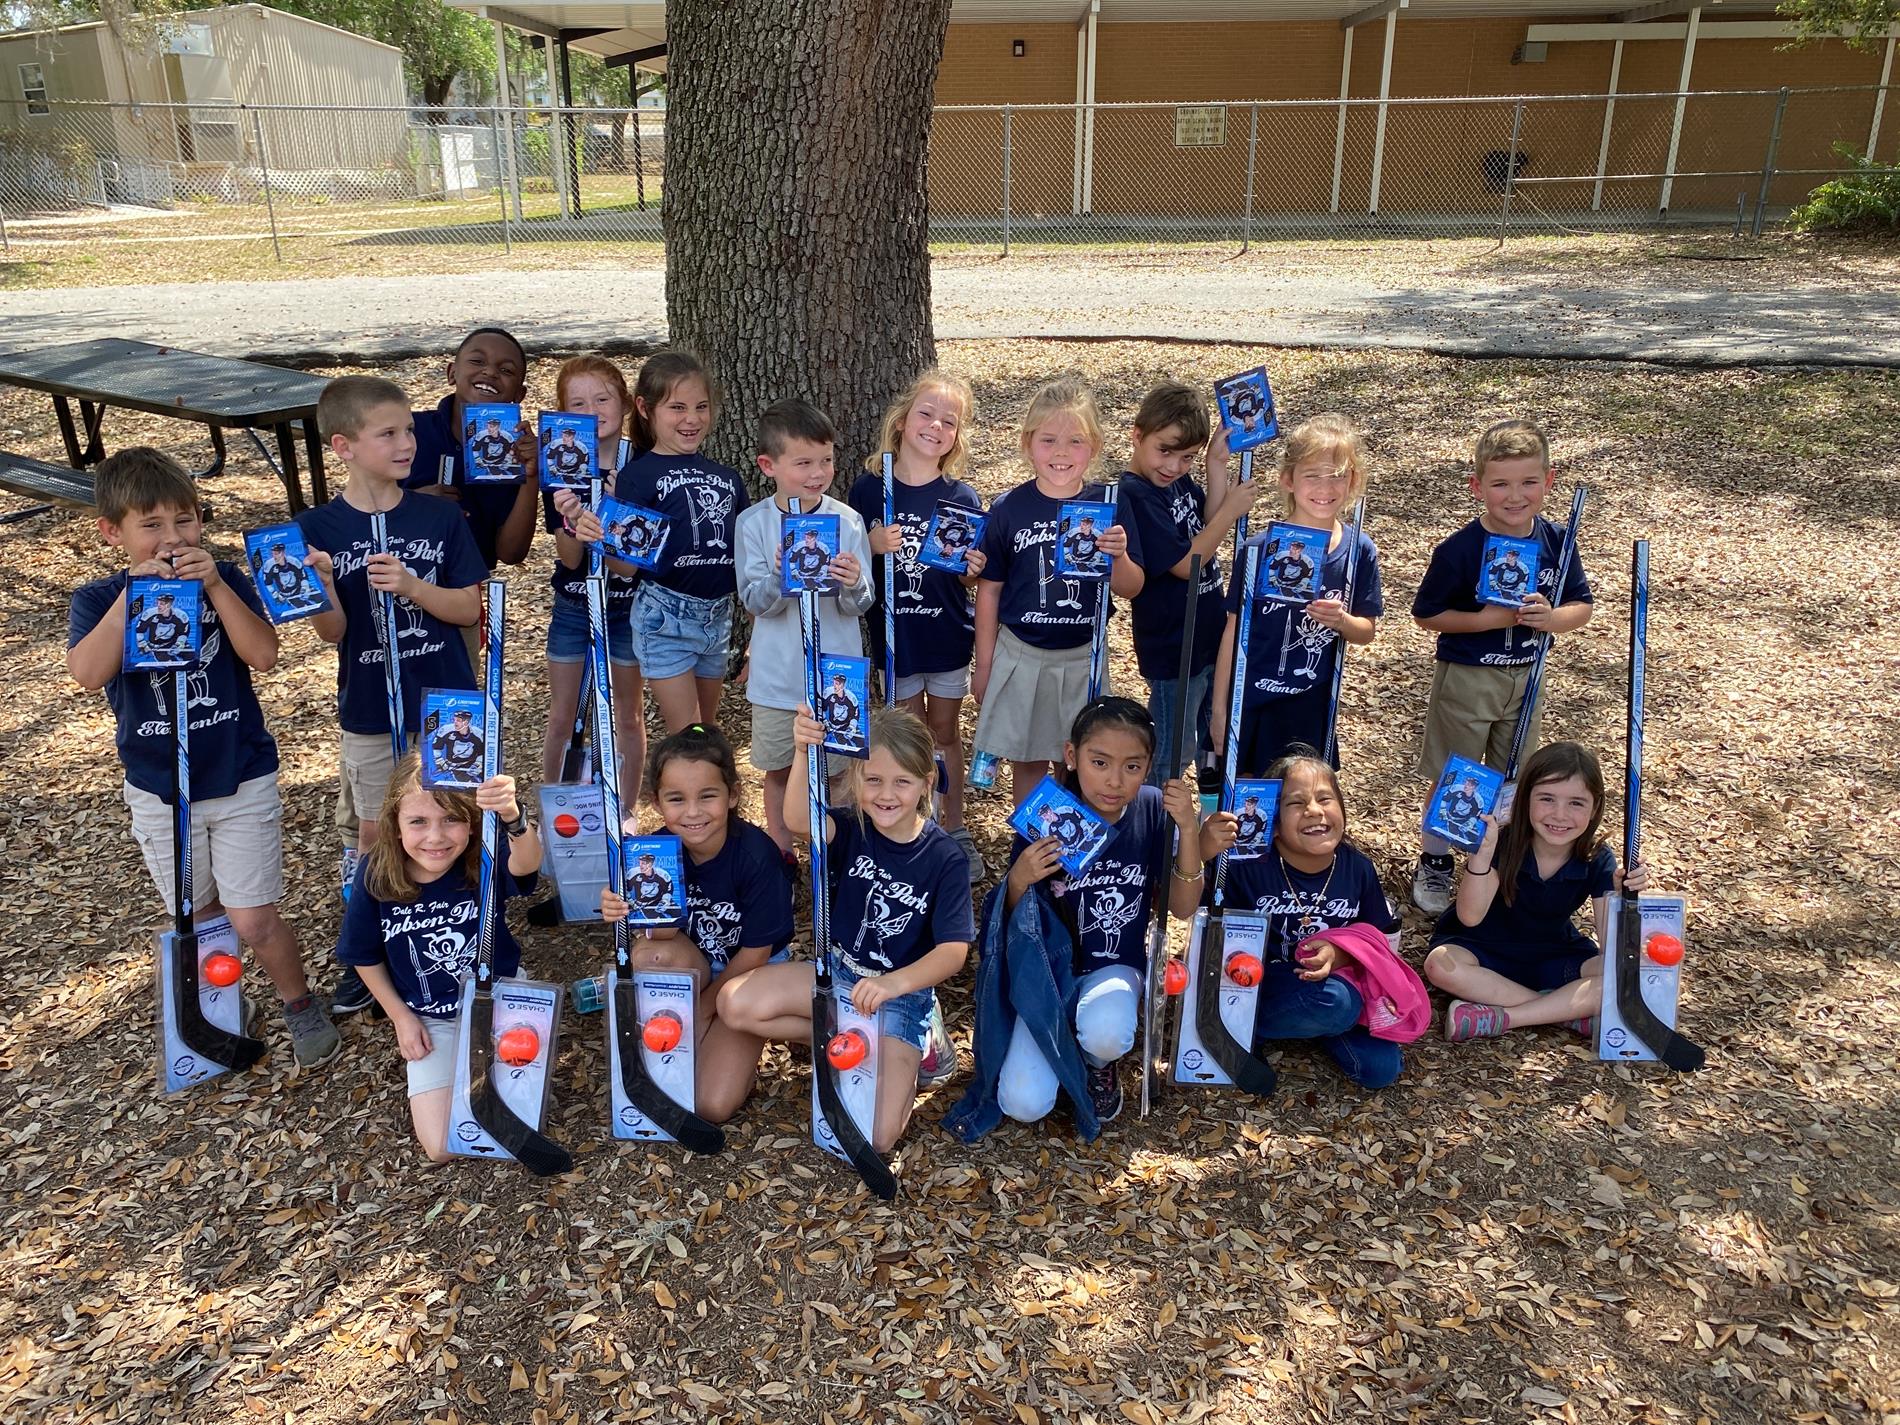 1st grade students with their hockey stick, ball, and autographed card.